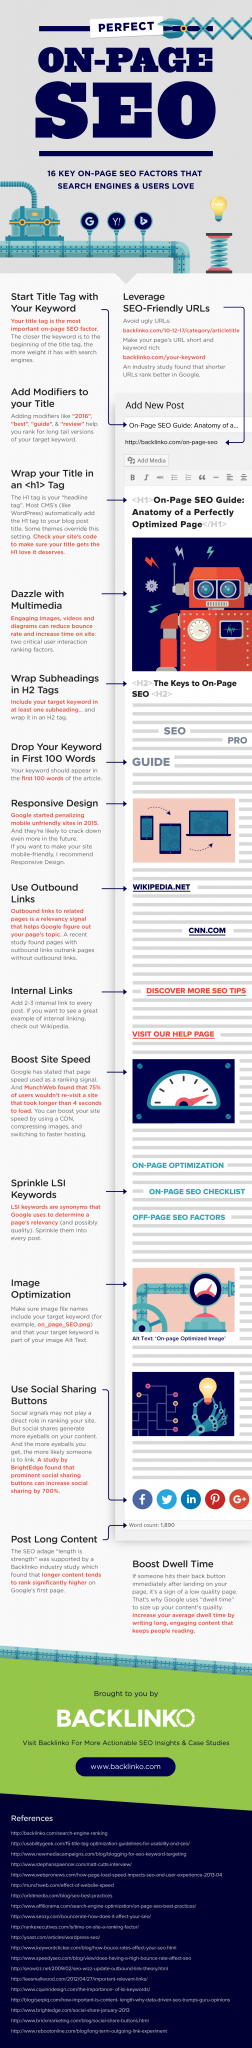 On Page SEO Infographic by Brian Dean